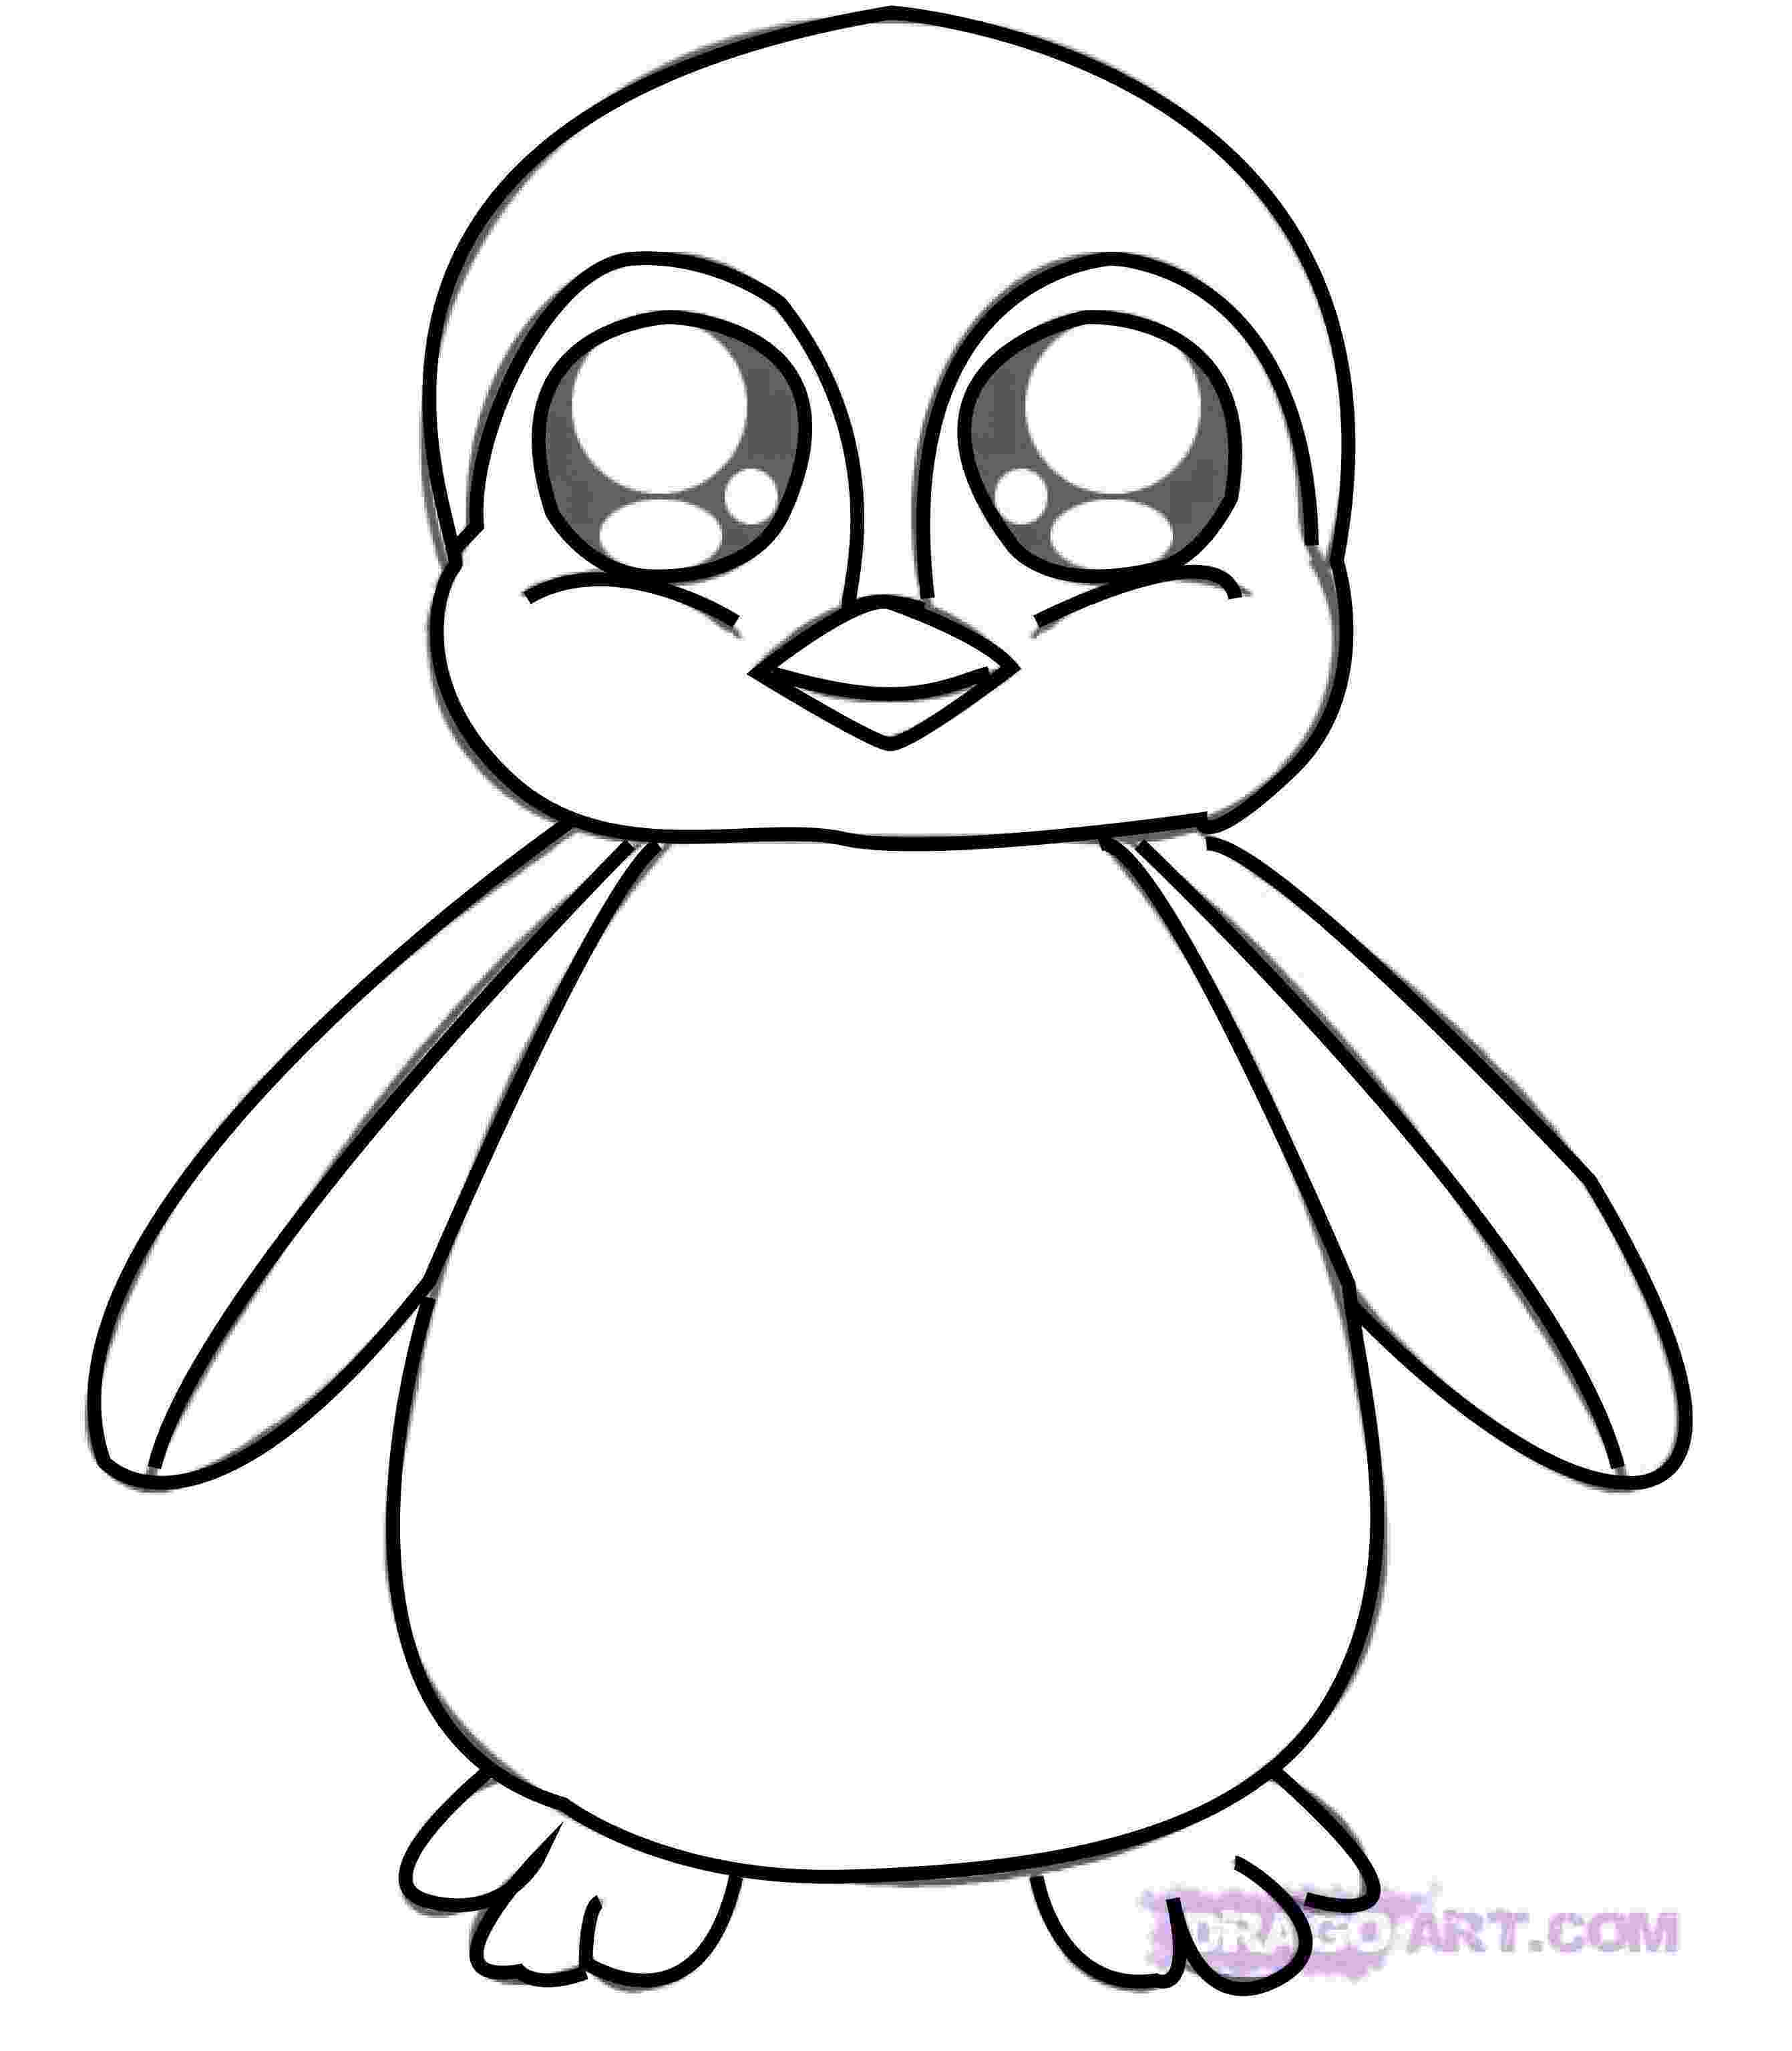 penguin colouring pictures penguin coloring page only coloring pages pictures penguin colouring 